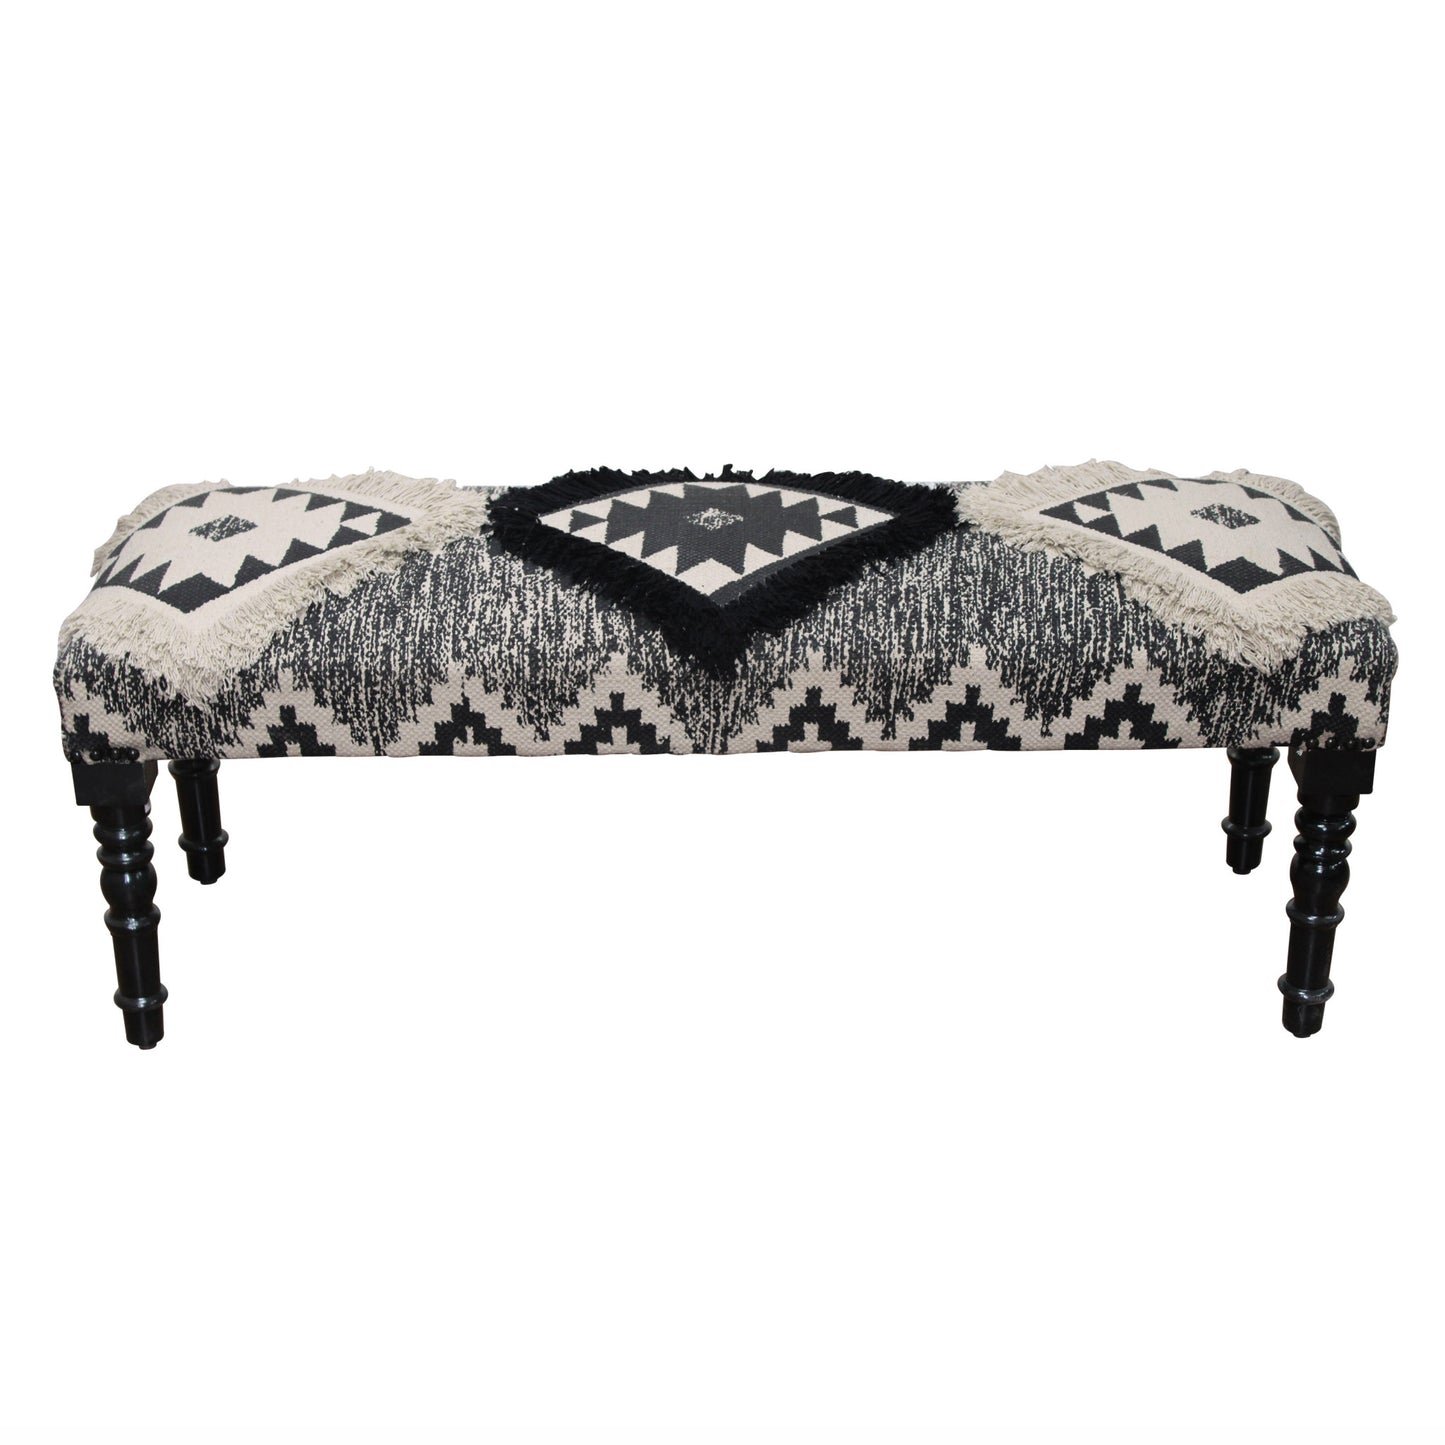 47" Black And White Black Leg Southwest Upholstered Bench By Homeroots